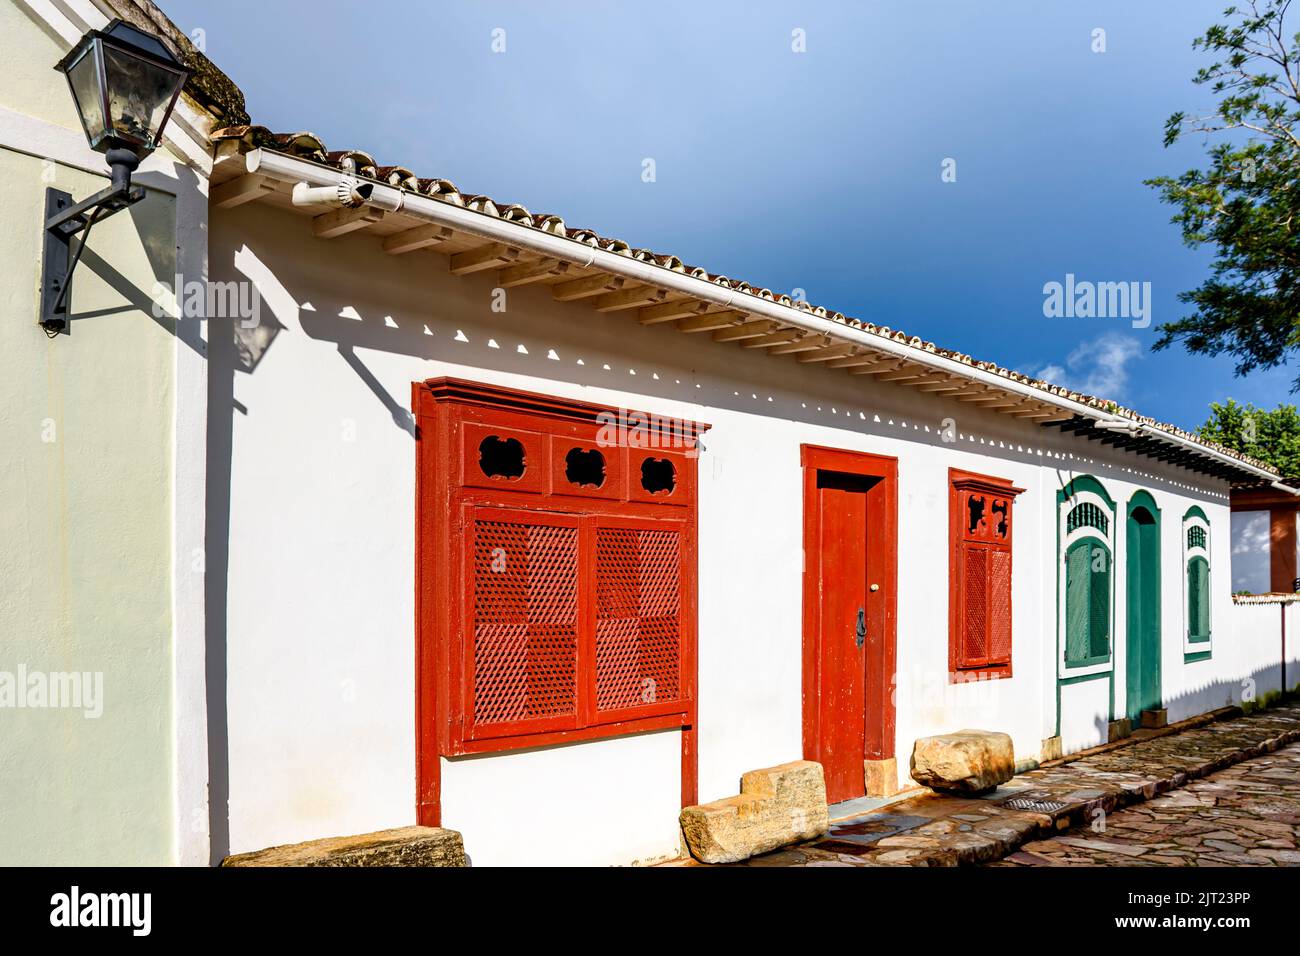 Street with ancient colonial style houses with colorful doors and windows in the historic city of Tiradentes in Minas Gerais, Brazil Stock Photo